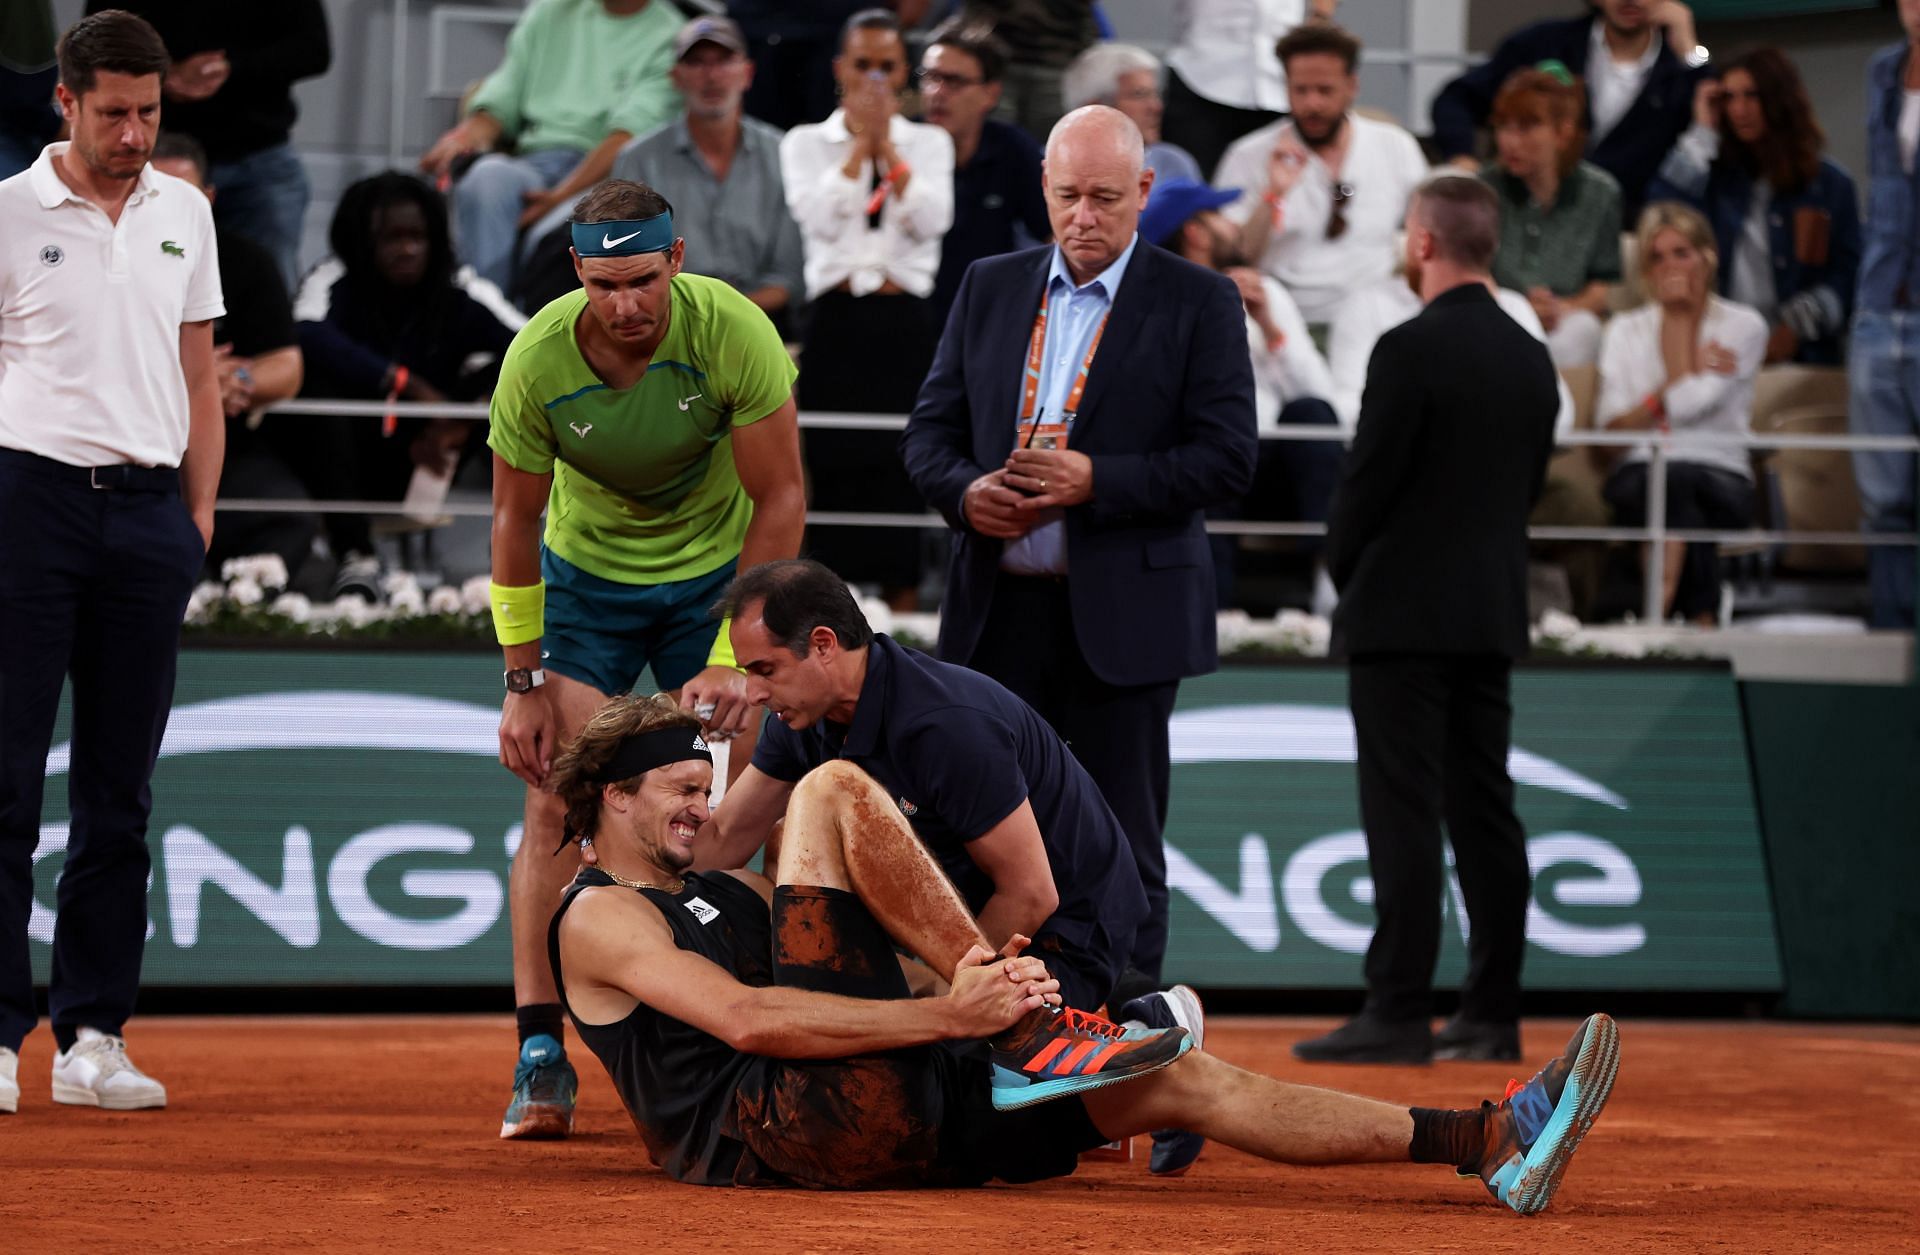 Alexander Zverev had to withdraw midway through the French Open SF against Rafael Nadal